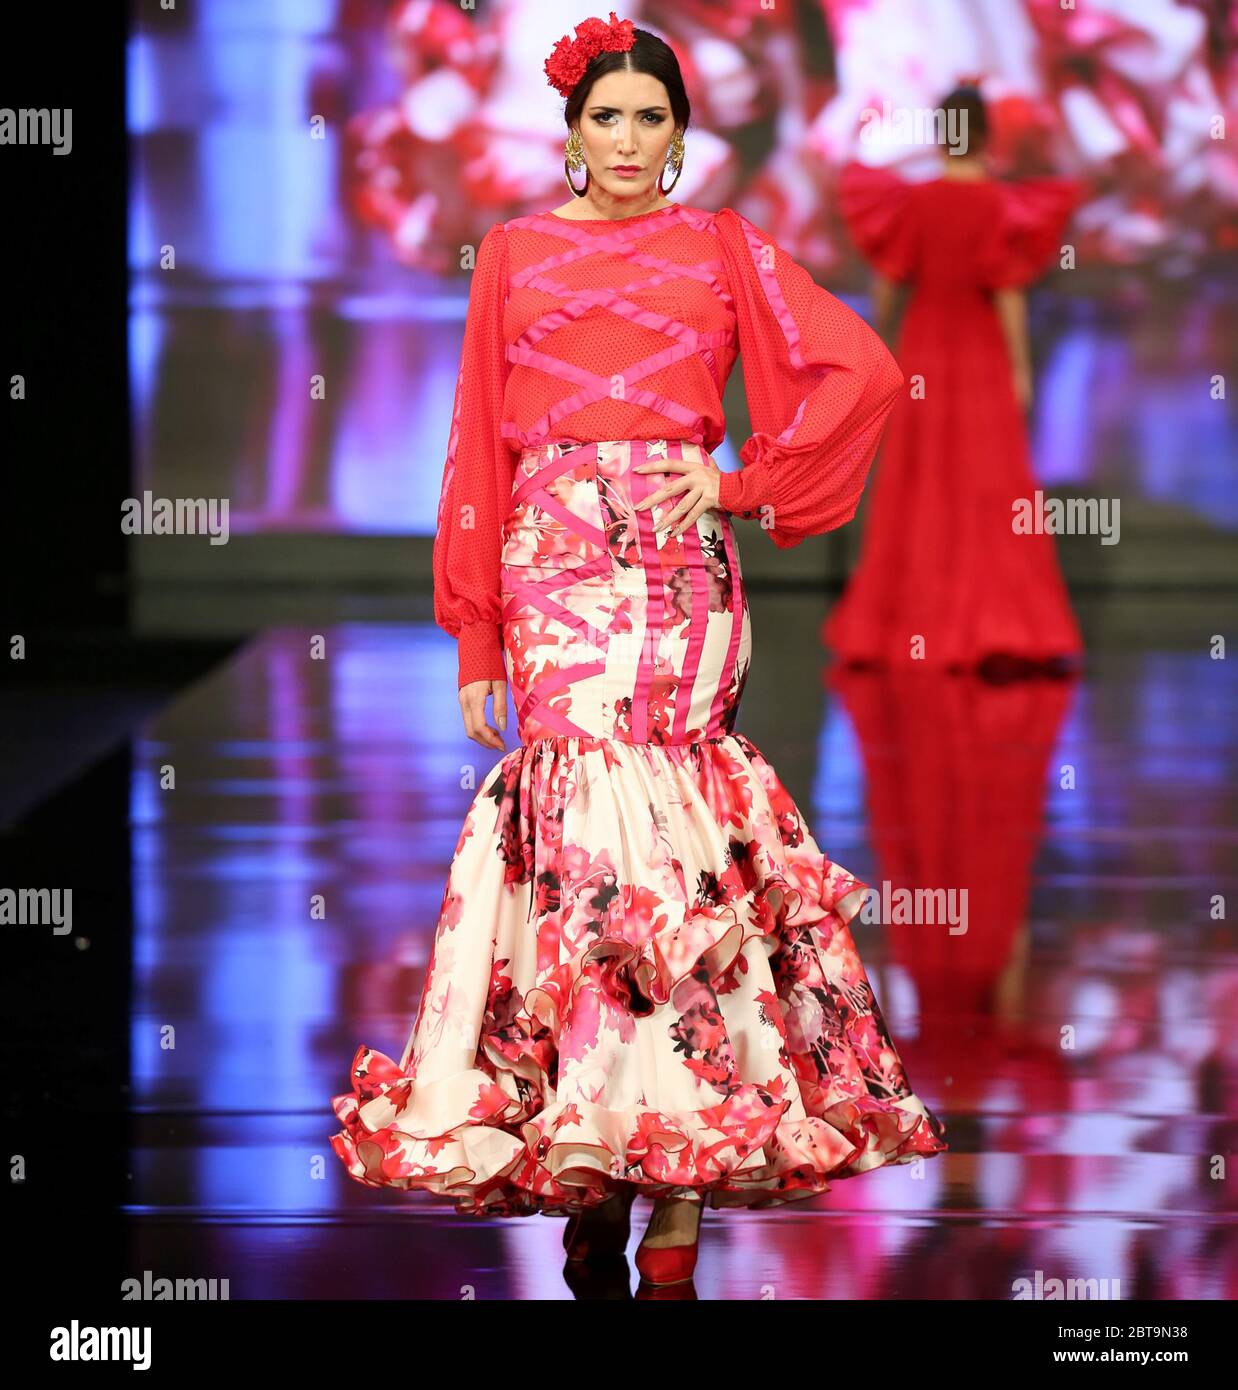 SEVILLA, SPAIN - JAN 31: Model wearing a dress from the Dualismo collection by designer Adelina Infante as part of the SIMOF 2020 (Photo credit: Mickael Chavet) Stock Photo